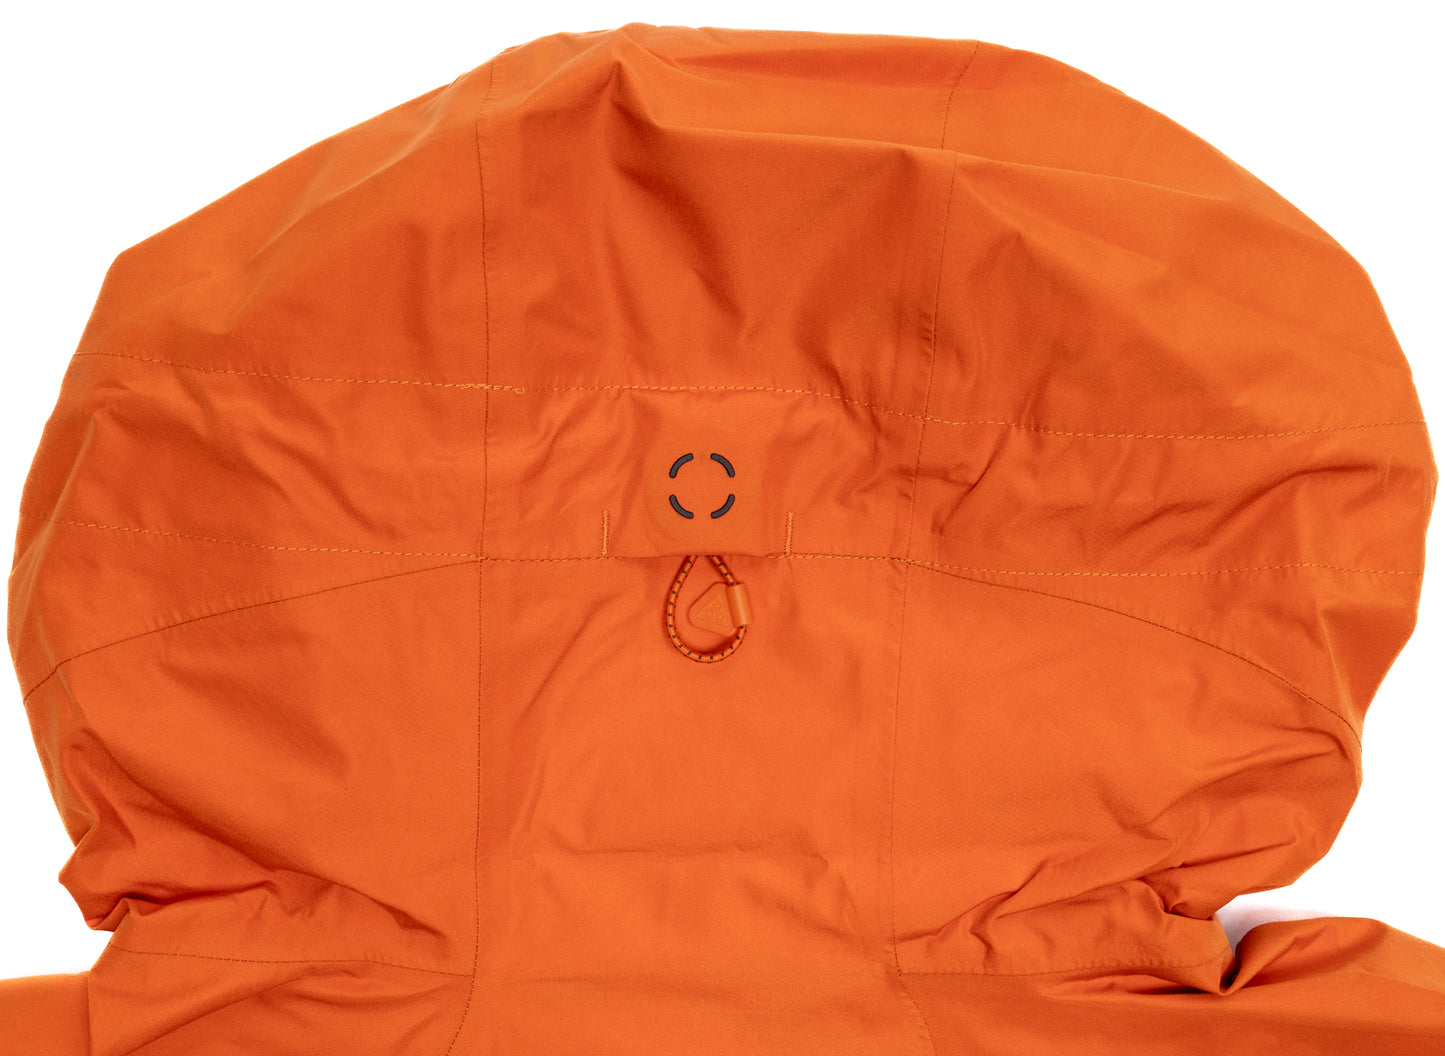 Nike Storm-Fit ADV ACG 'Chain of Craters' Jacket